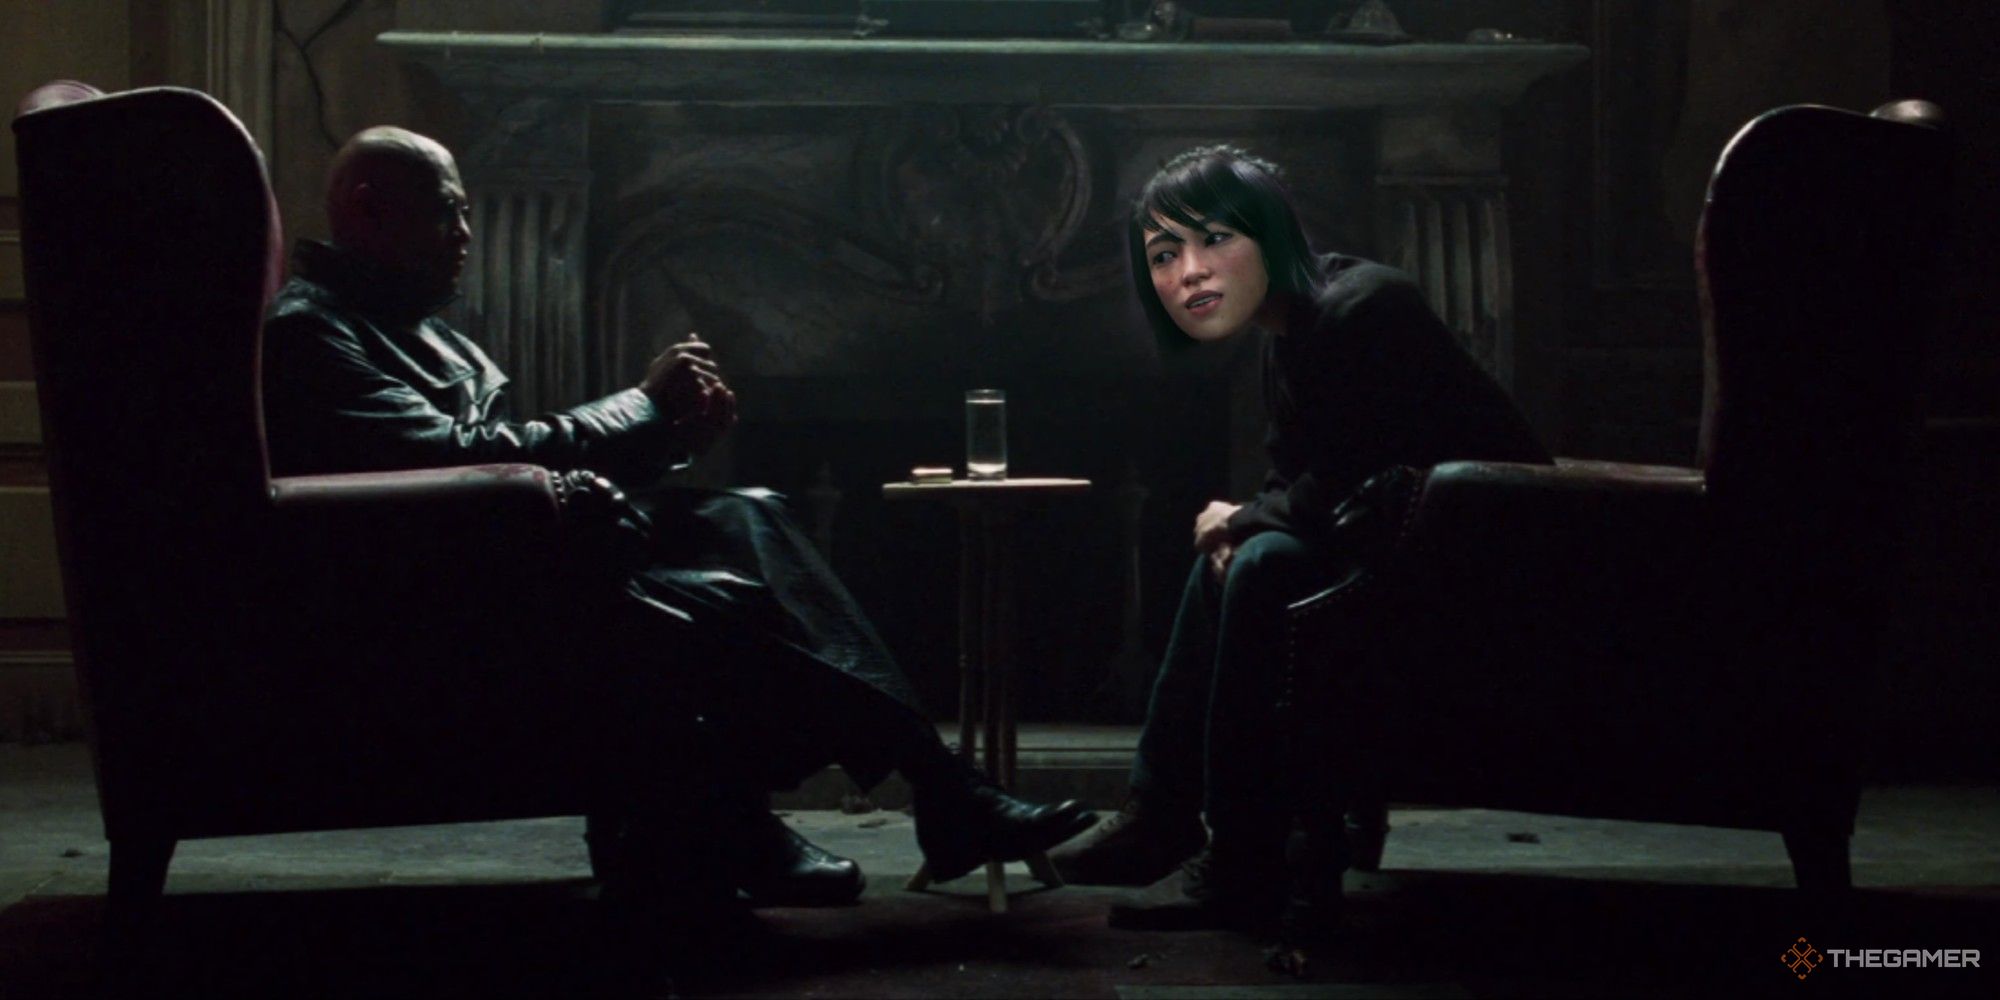 Matrix scene where morpheus offers the pill, with the face of cementine from remnant 2